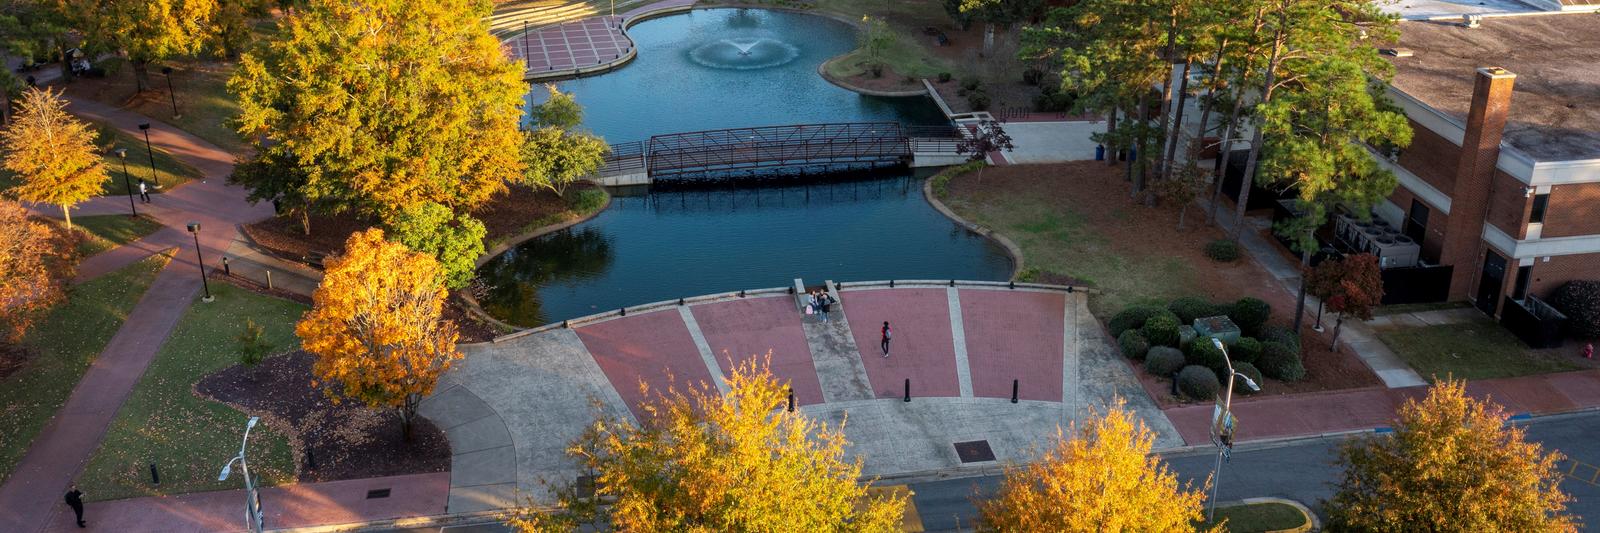 UNCP's Quad and Water Feature at sunset